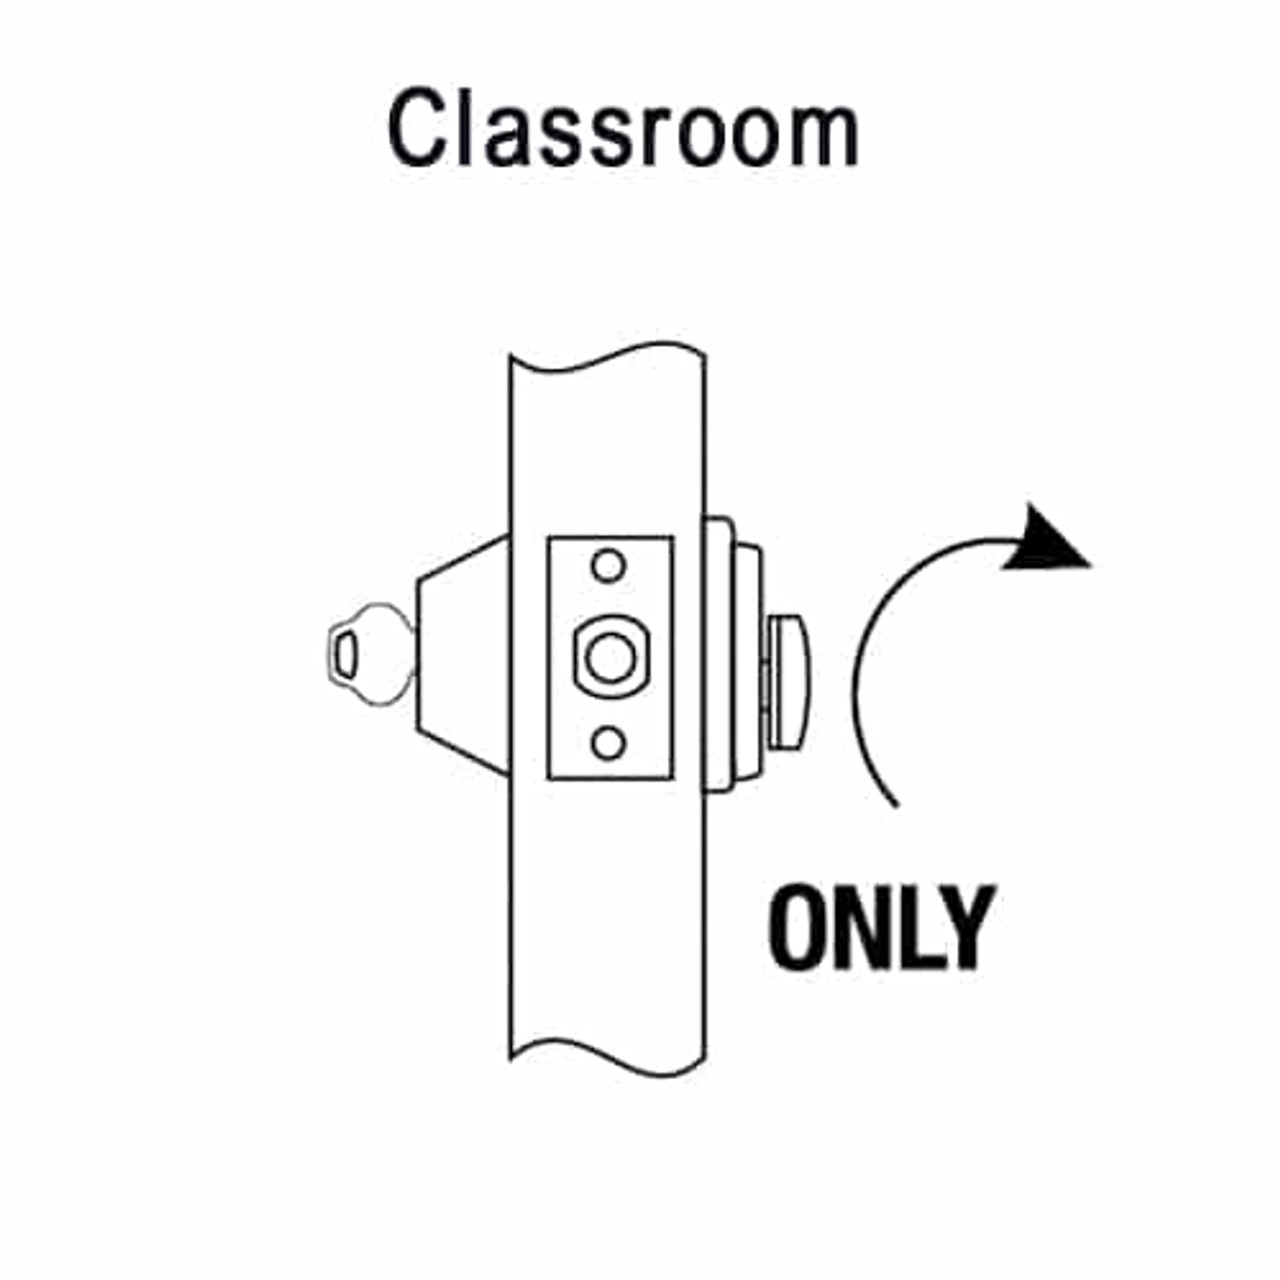 DL2217-605-CL6 Corbin DL2200 Series Classroom Cylindrical Deadlocks with Single Cylinder in Bright Brass